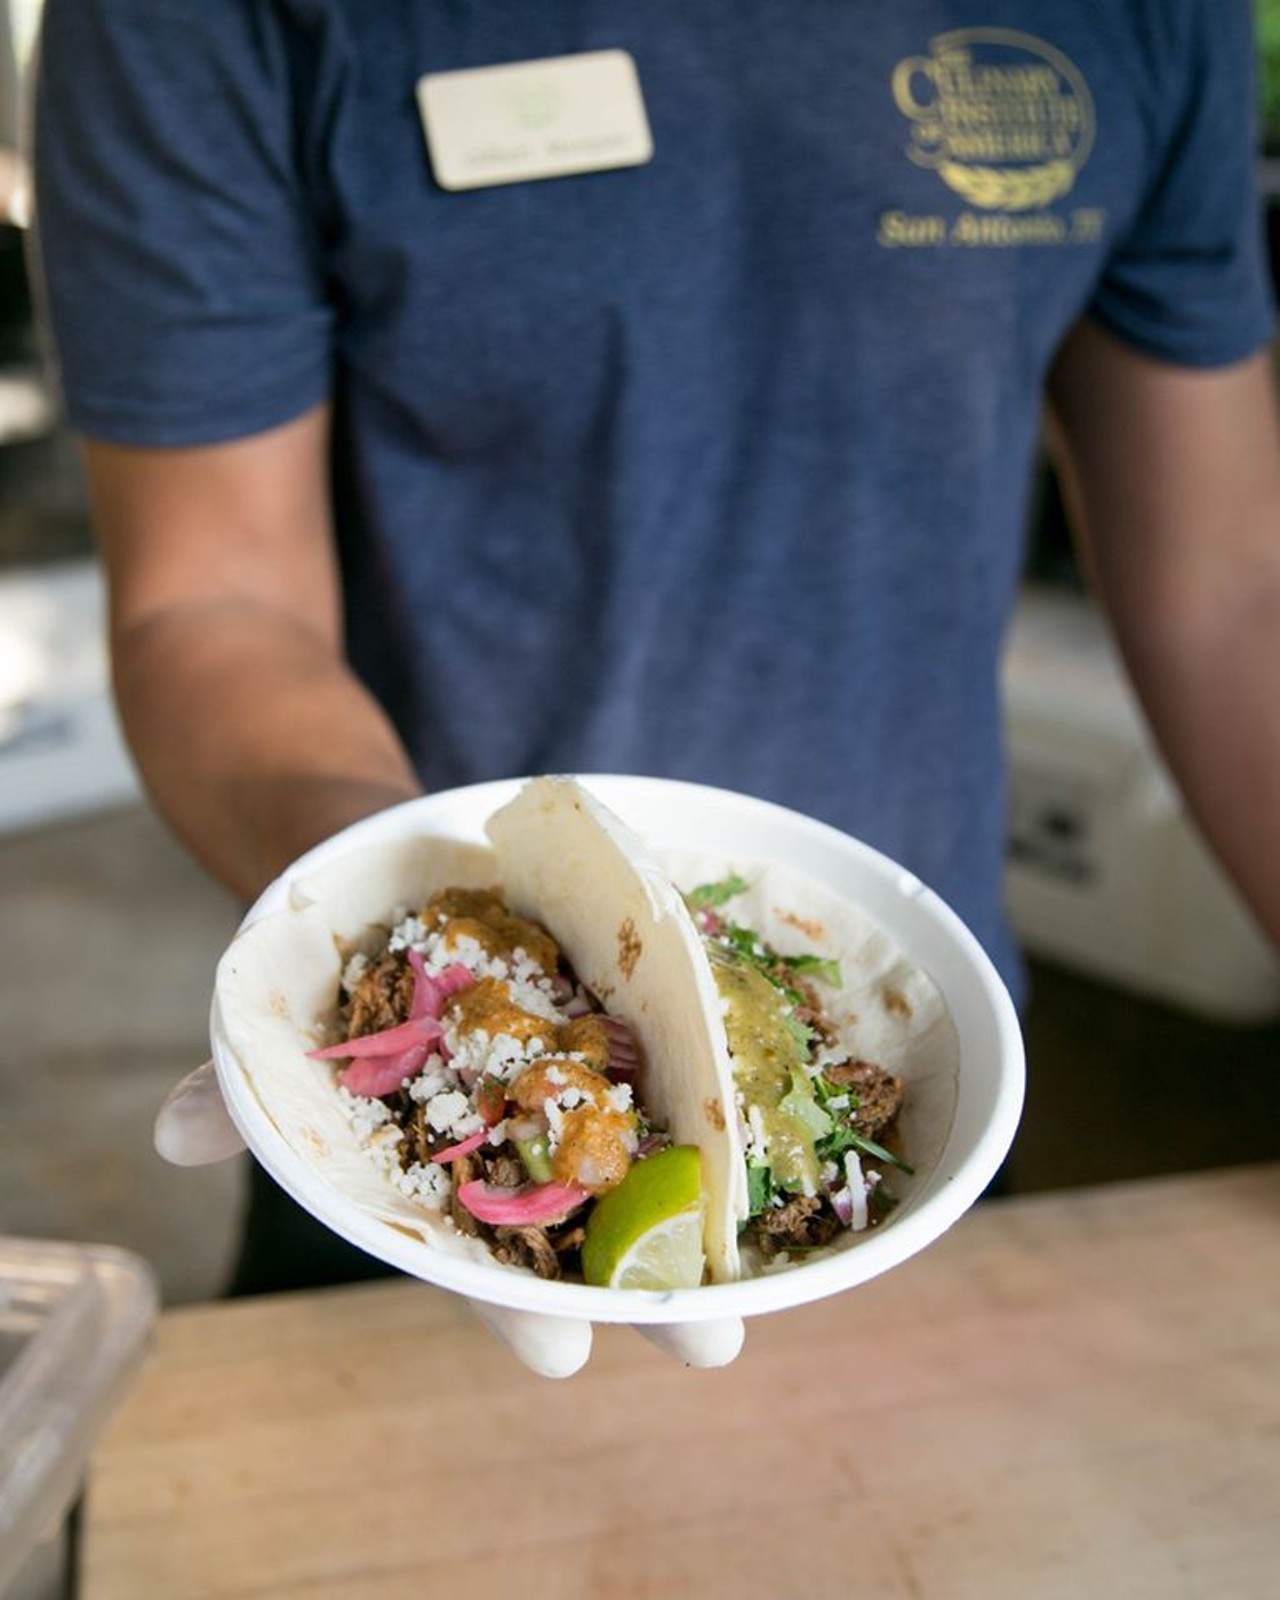 Protein-packed breakfast tacos? YES, PLEASE. Maybe Savor at the CIA will be serving their brisket tacos at United We Brunch 2020?